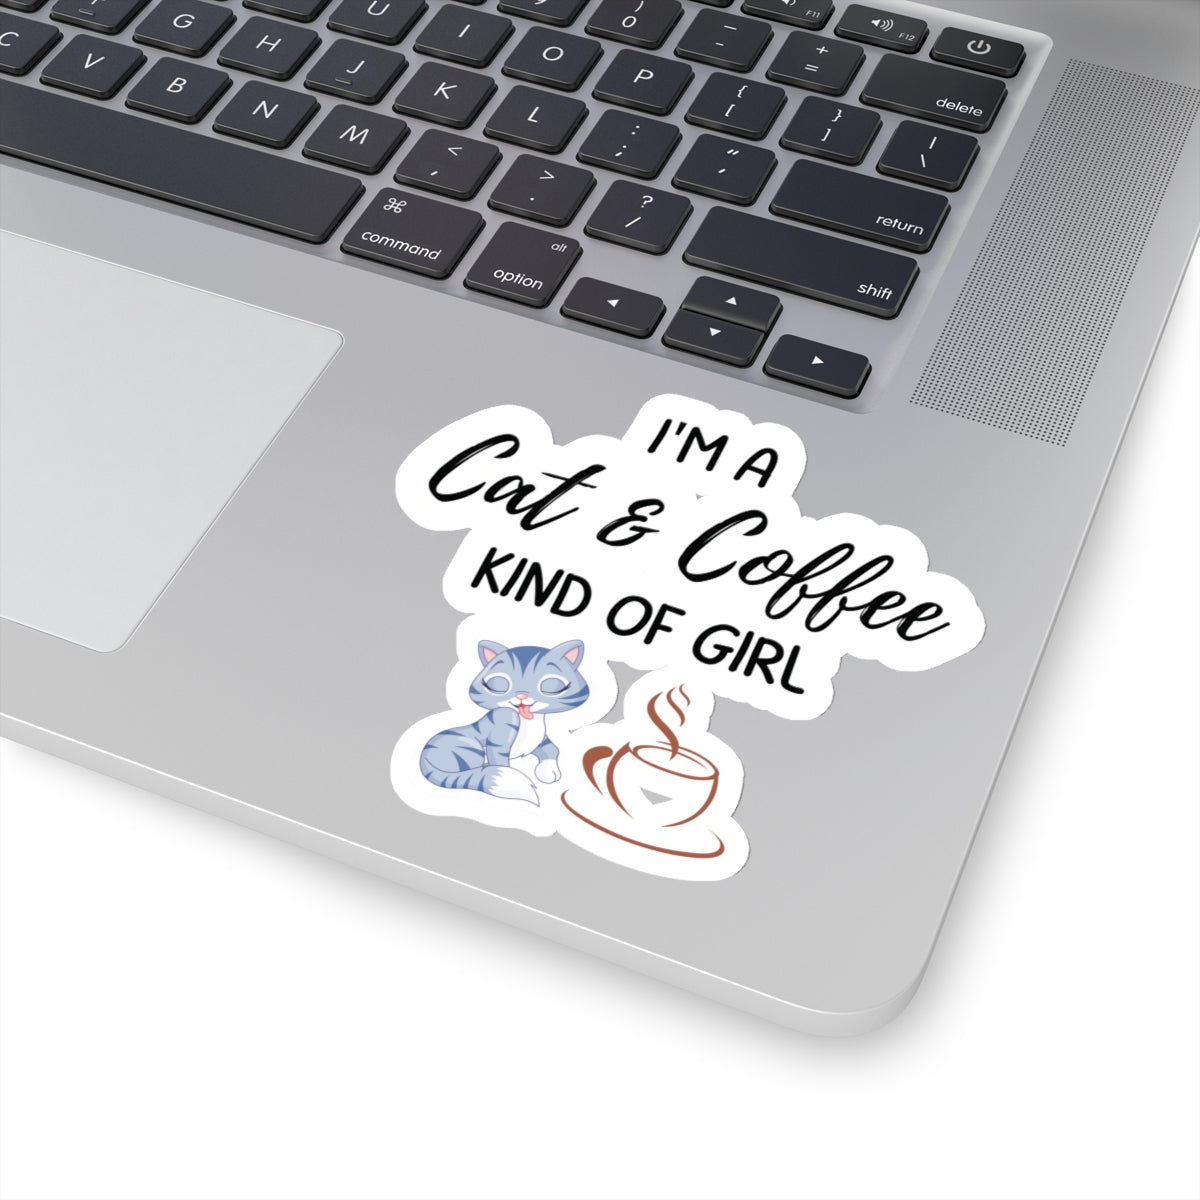 A Cat and Coffee Kind Of Girl Inspirational Quote Kiss-Cut Stickers-Paper products-mysticalcherry